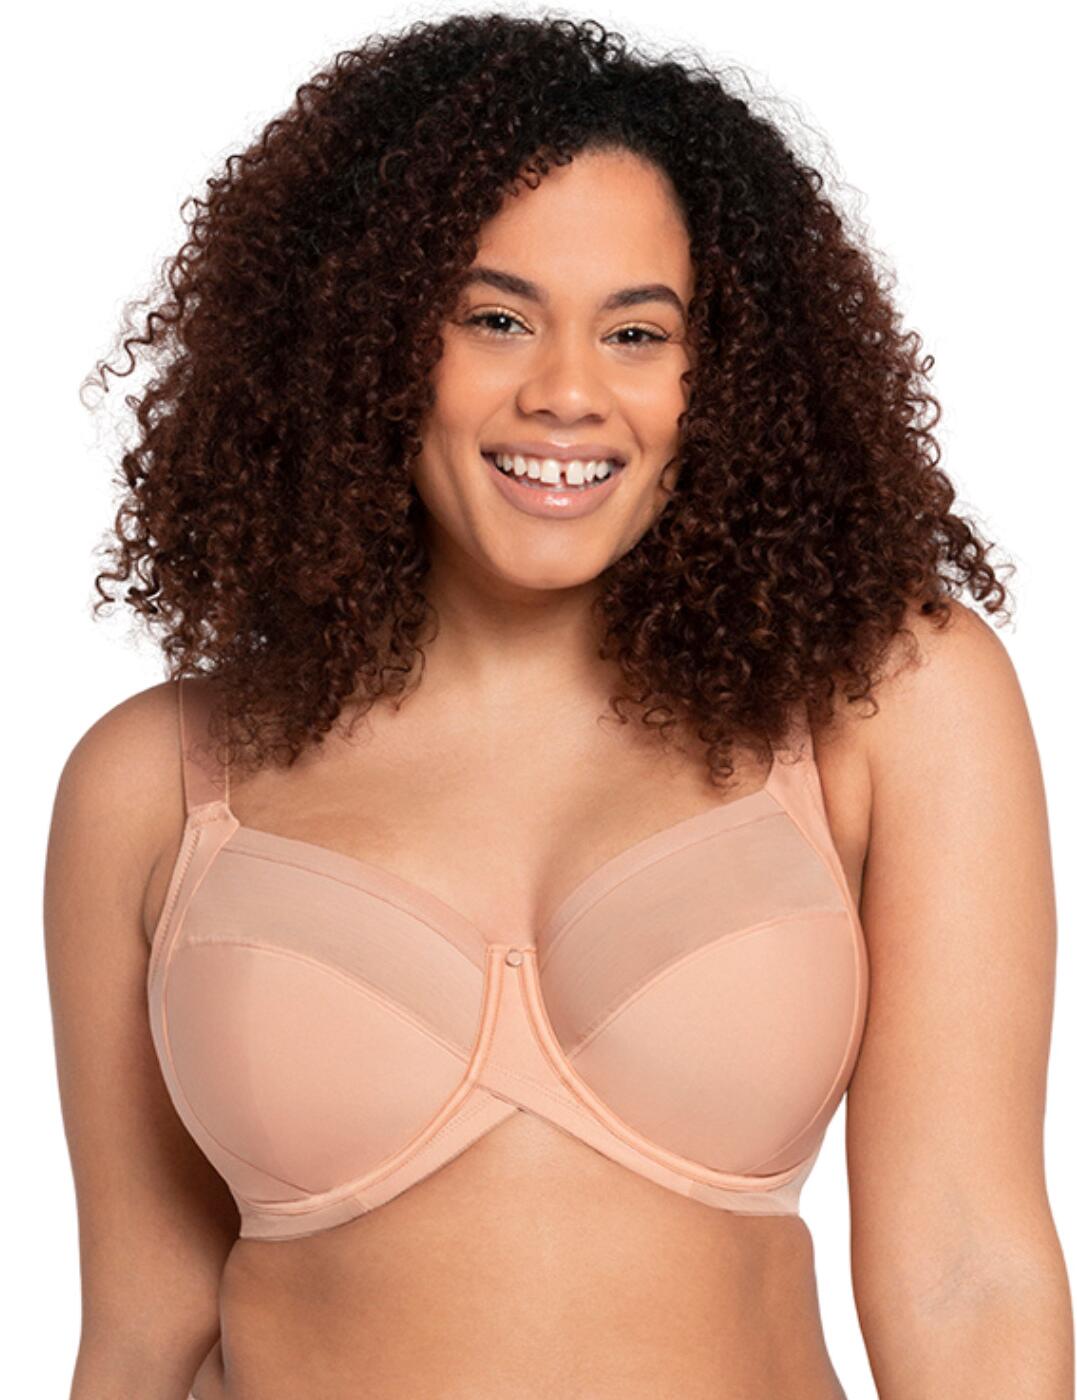 Wholesale bra 46 - Offering Lingerie For The Curvy Lady 